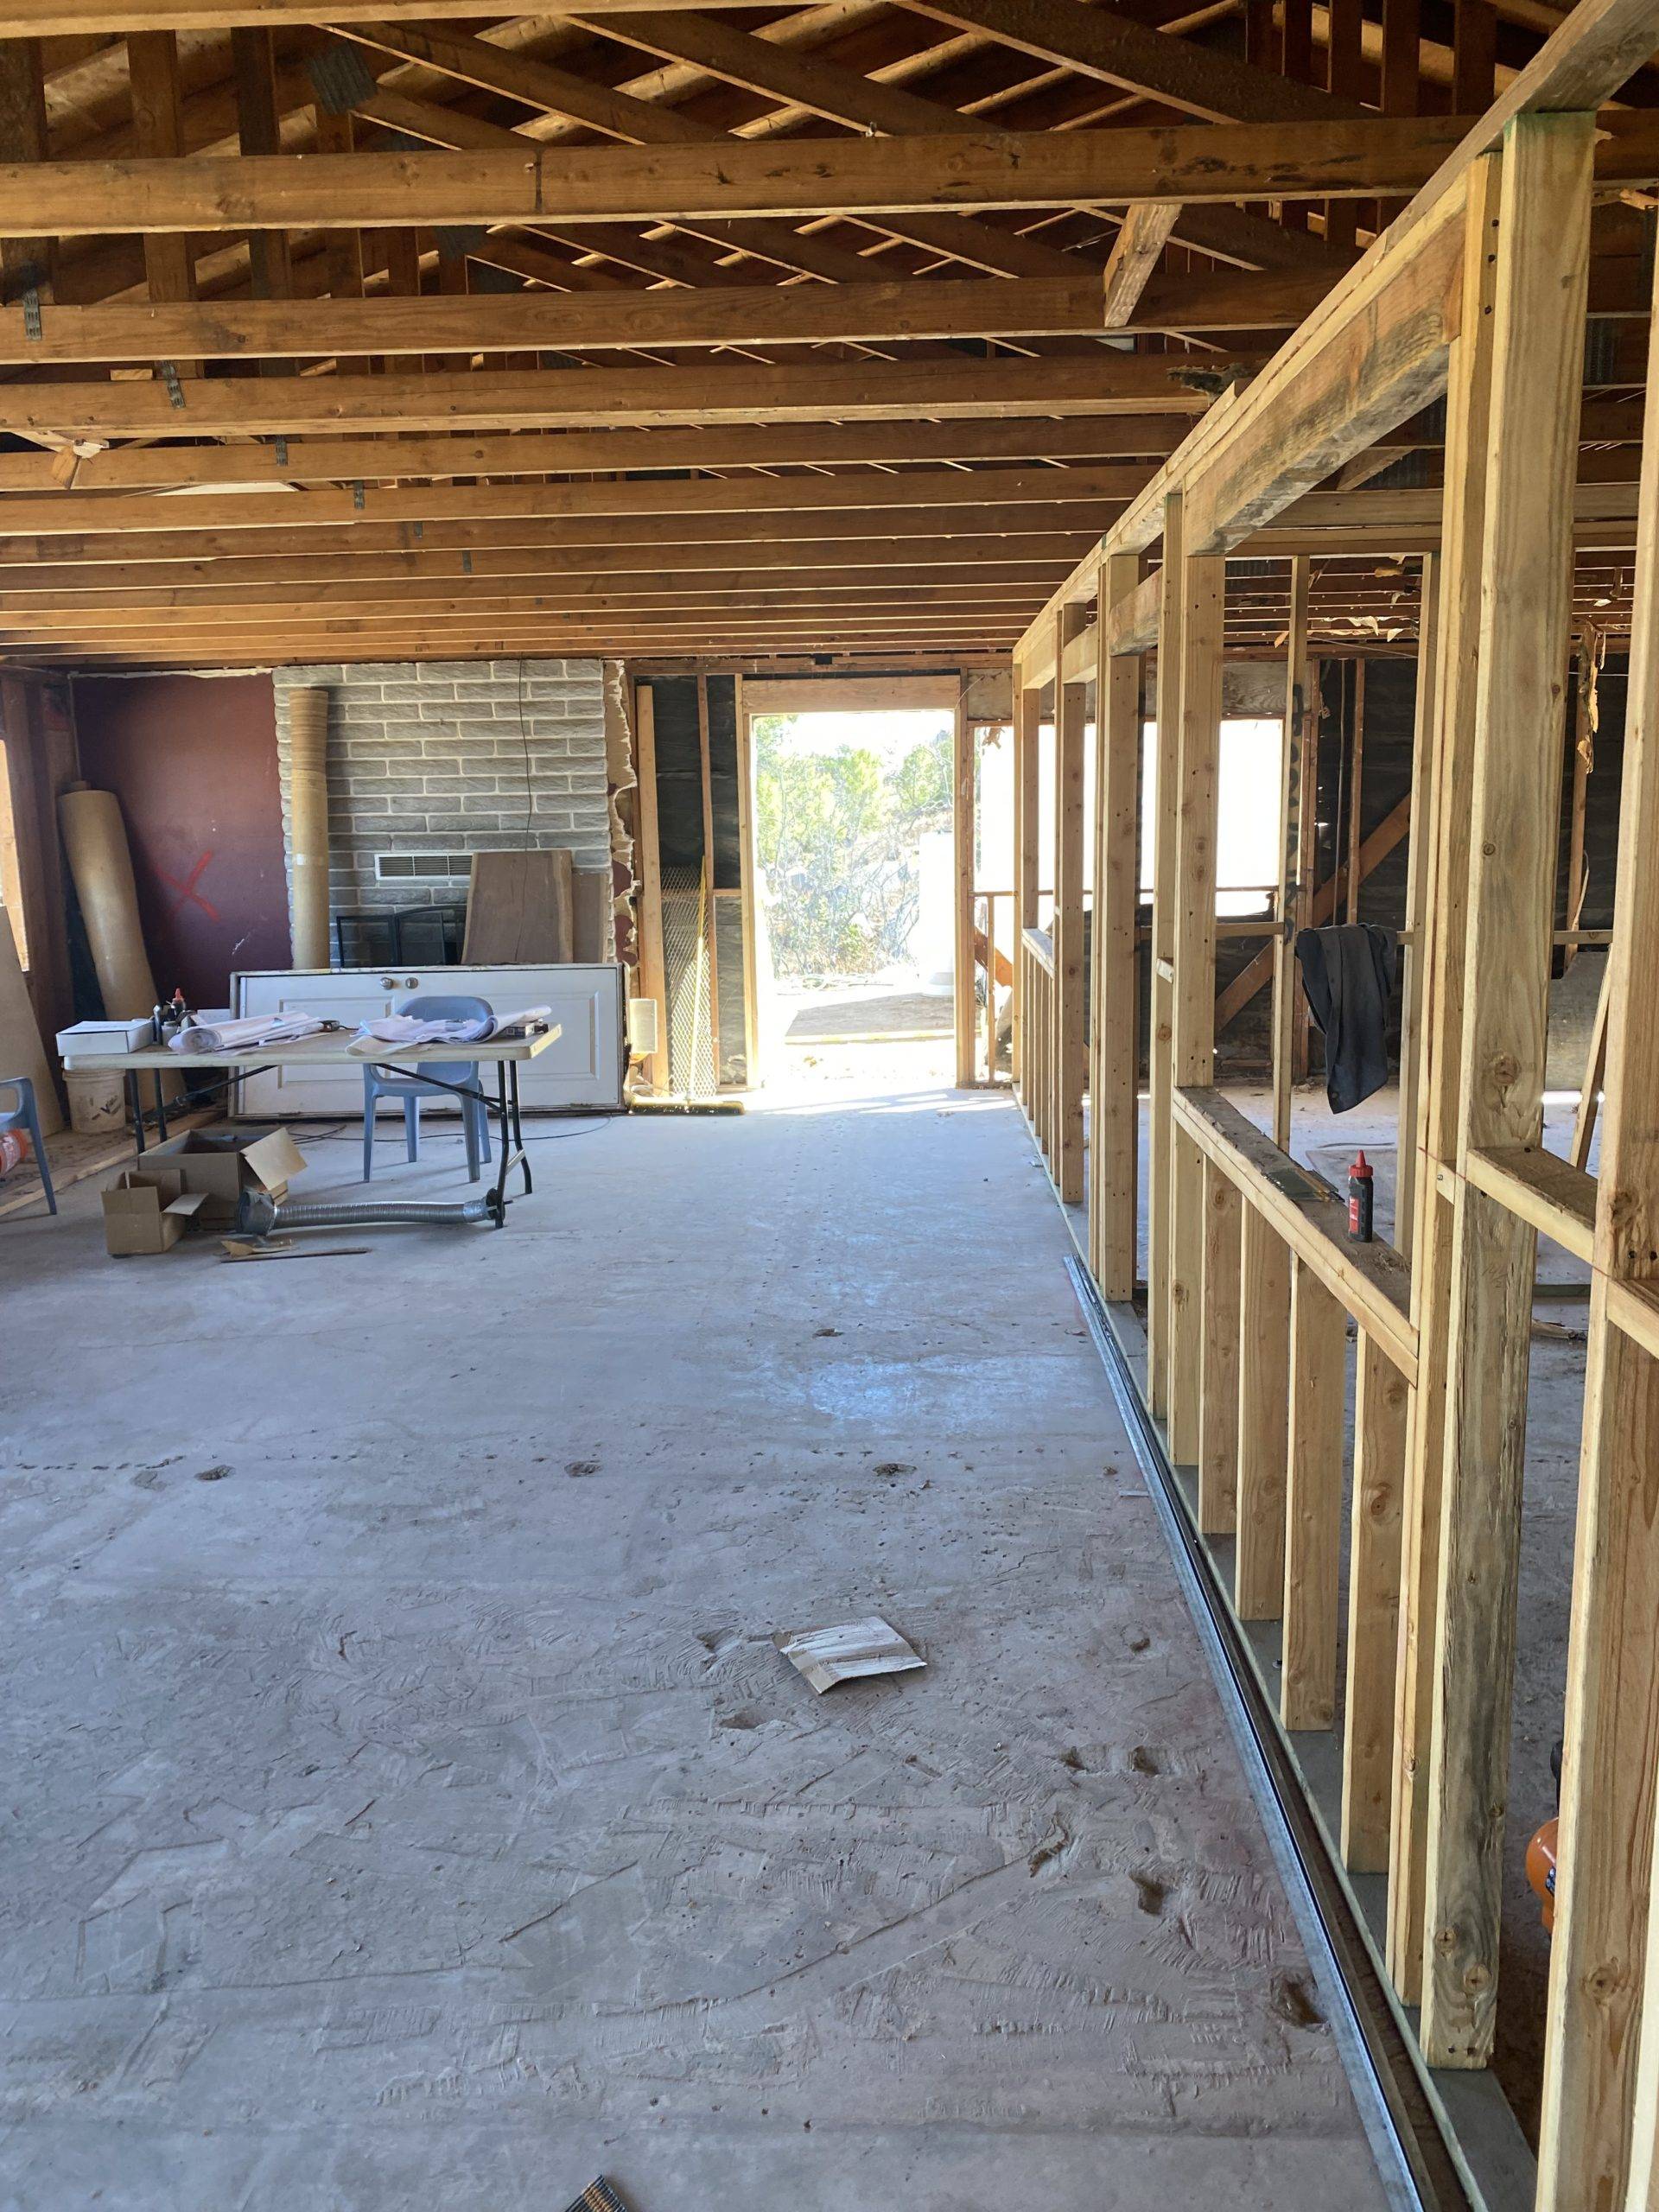 Interior of a ranch home under construction. All the walls are studs and the floor raw concrete. Photo is vertical with a stud wall on the right and the room cropped down the middle on the left. Open beams in the ceiling can be seen at the top.